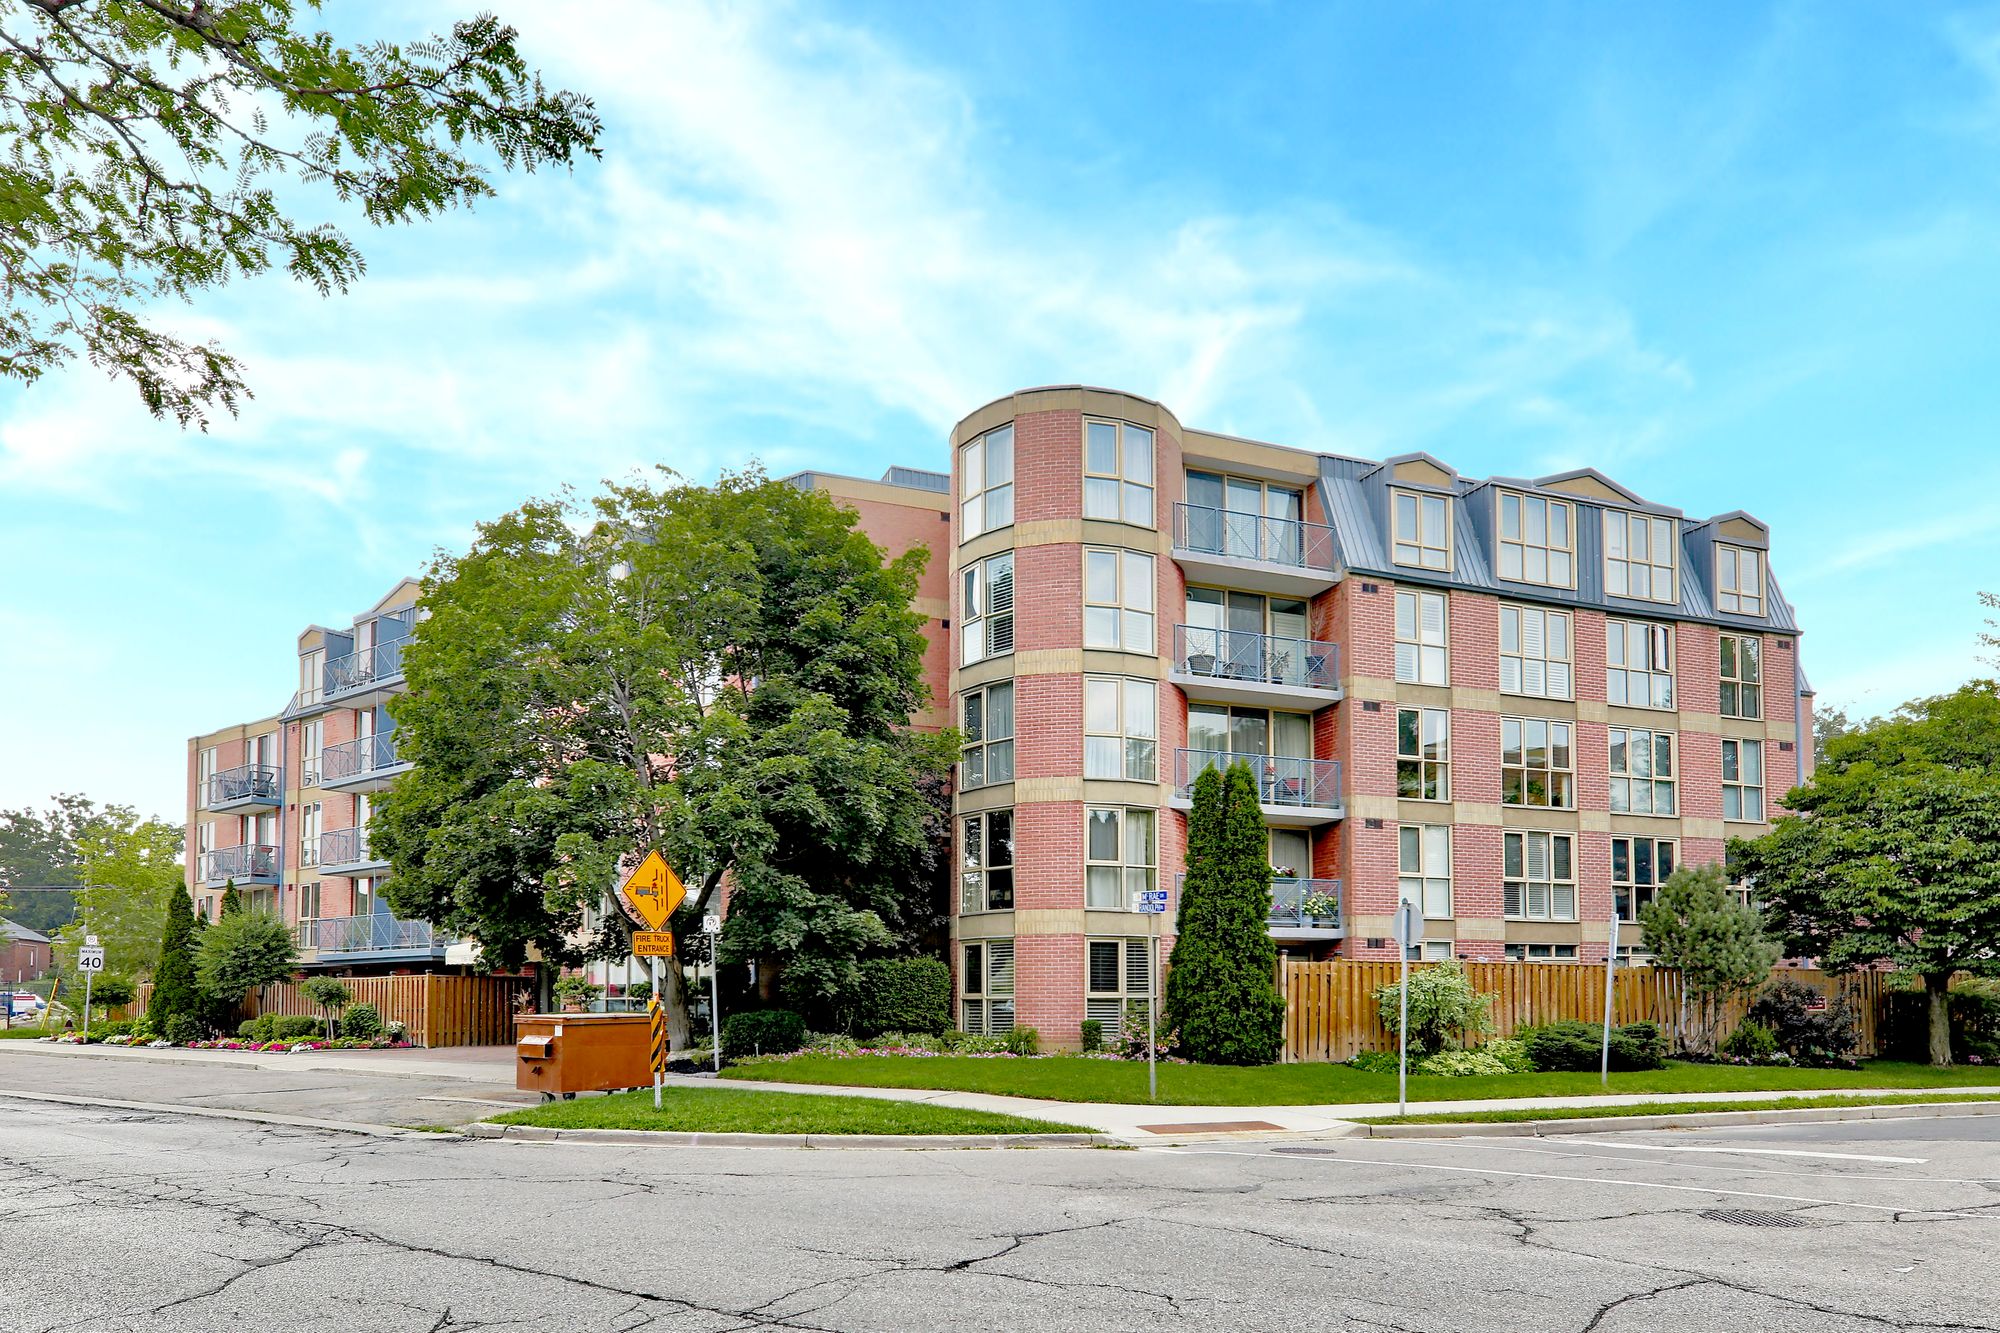 356 Mcrae Dr. This condo townhouse at The Randolph is located in  East York, Toronto - image #1 of 4 by Strata.ca